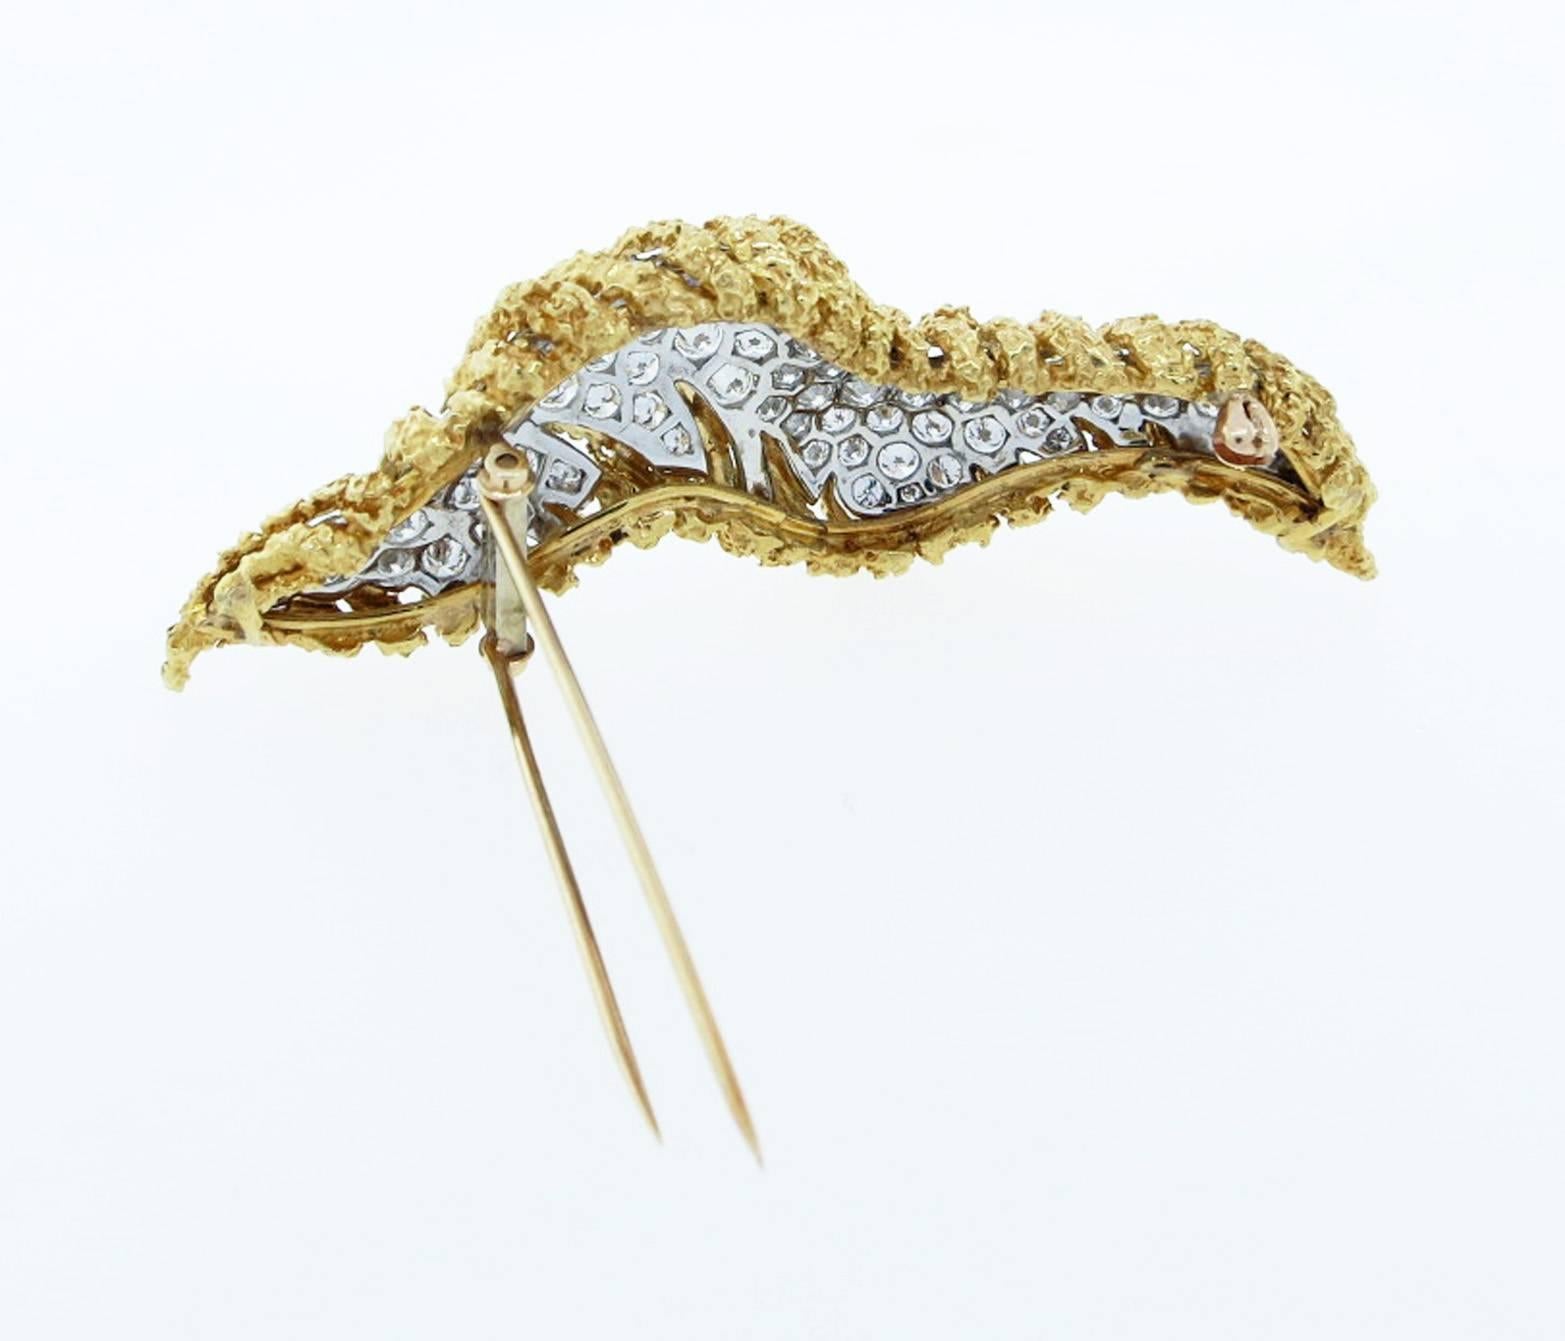 Beautiful crunchy design 18kt. yellow gold brooch measuring approx 3 inches in length and weighs 31.2 gr. with a white gold inset that is bead set with 73 round brilliant cut diamonds totaling approx 4.5cts. grading Vvs1-Vs1 clarity F-G color.